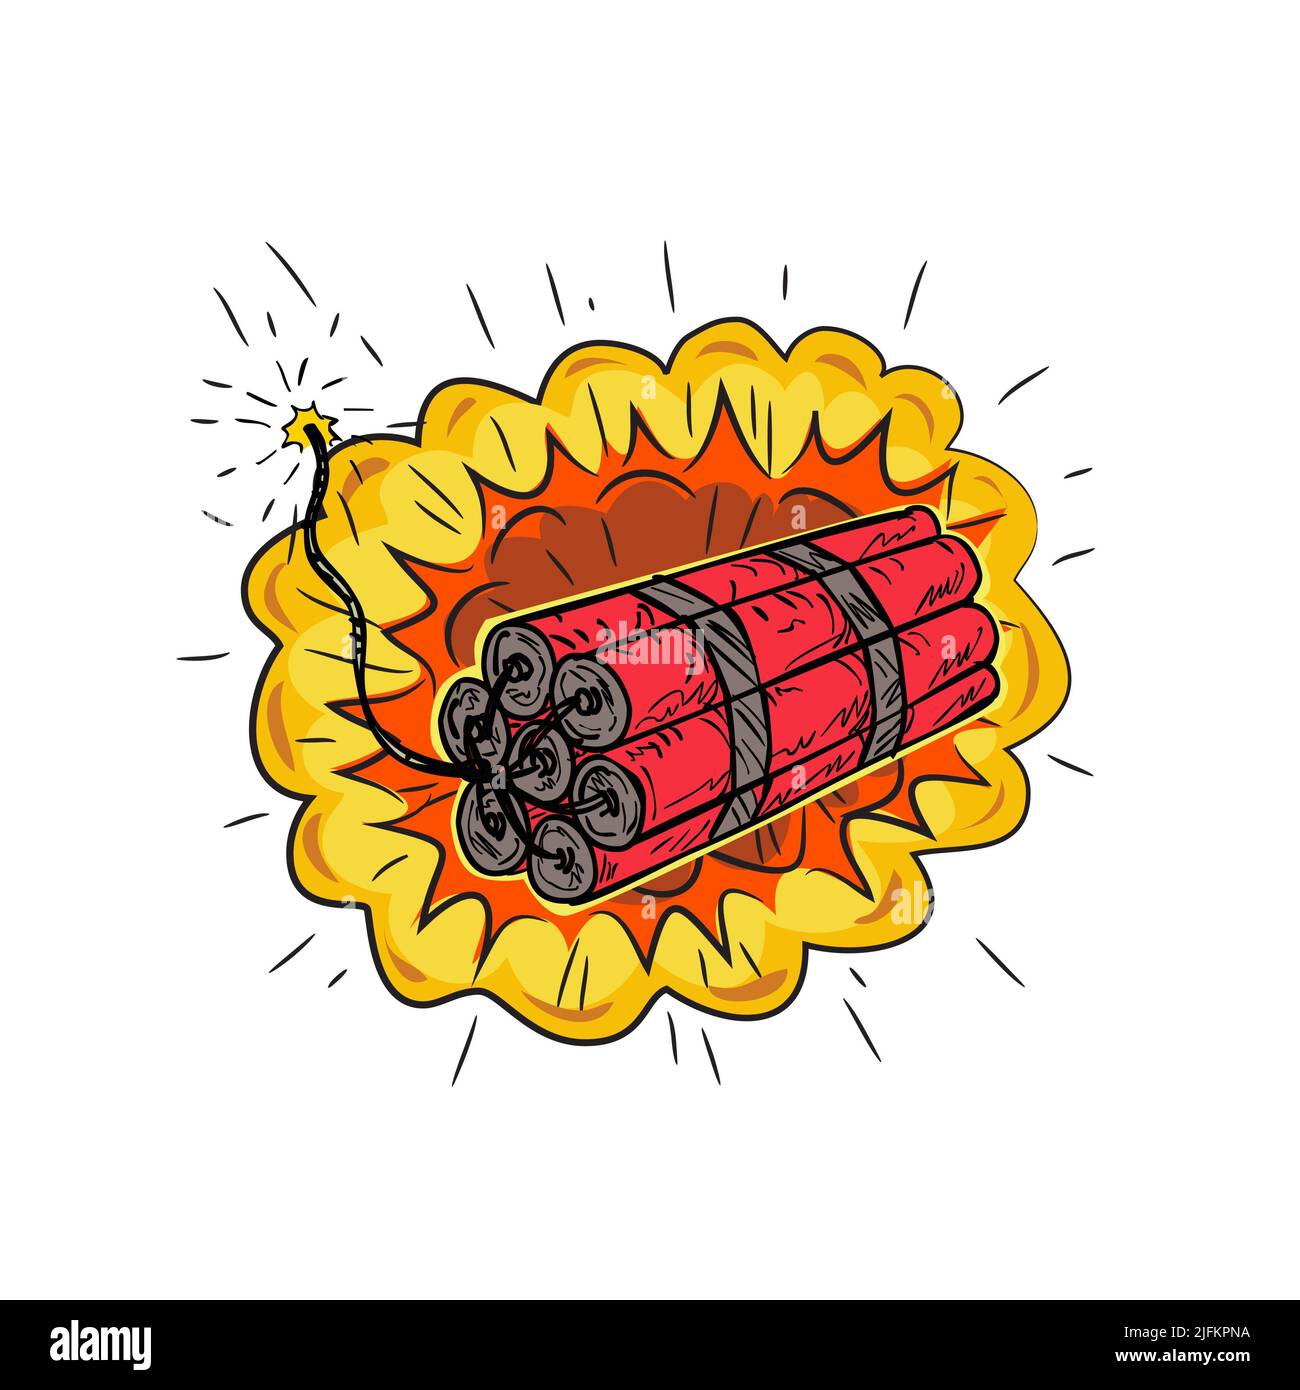 Drawing sketch style illustration of sticks of explosive TNT dynamite stick with lit or burning fuse and exploding on isolated white background. Stock Photo